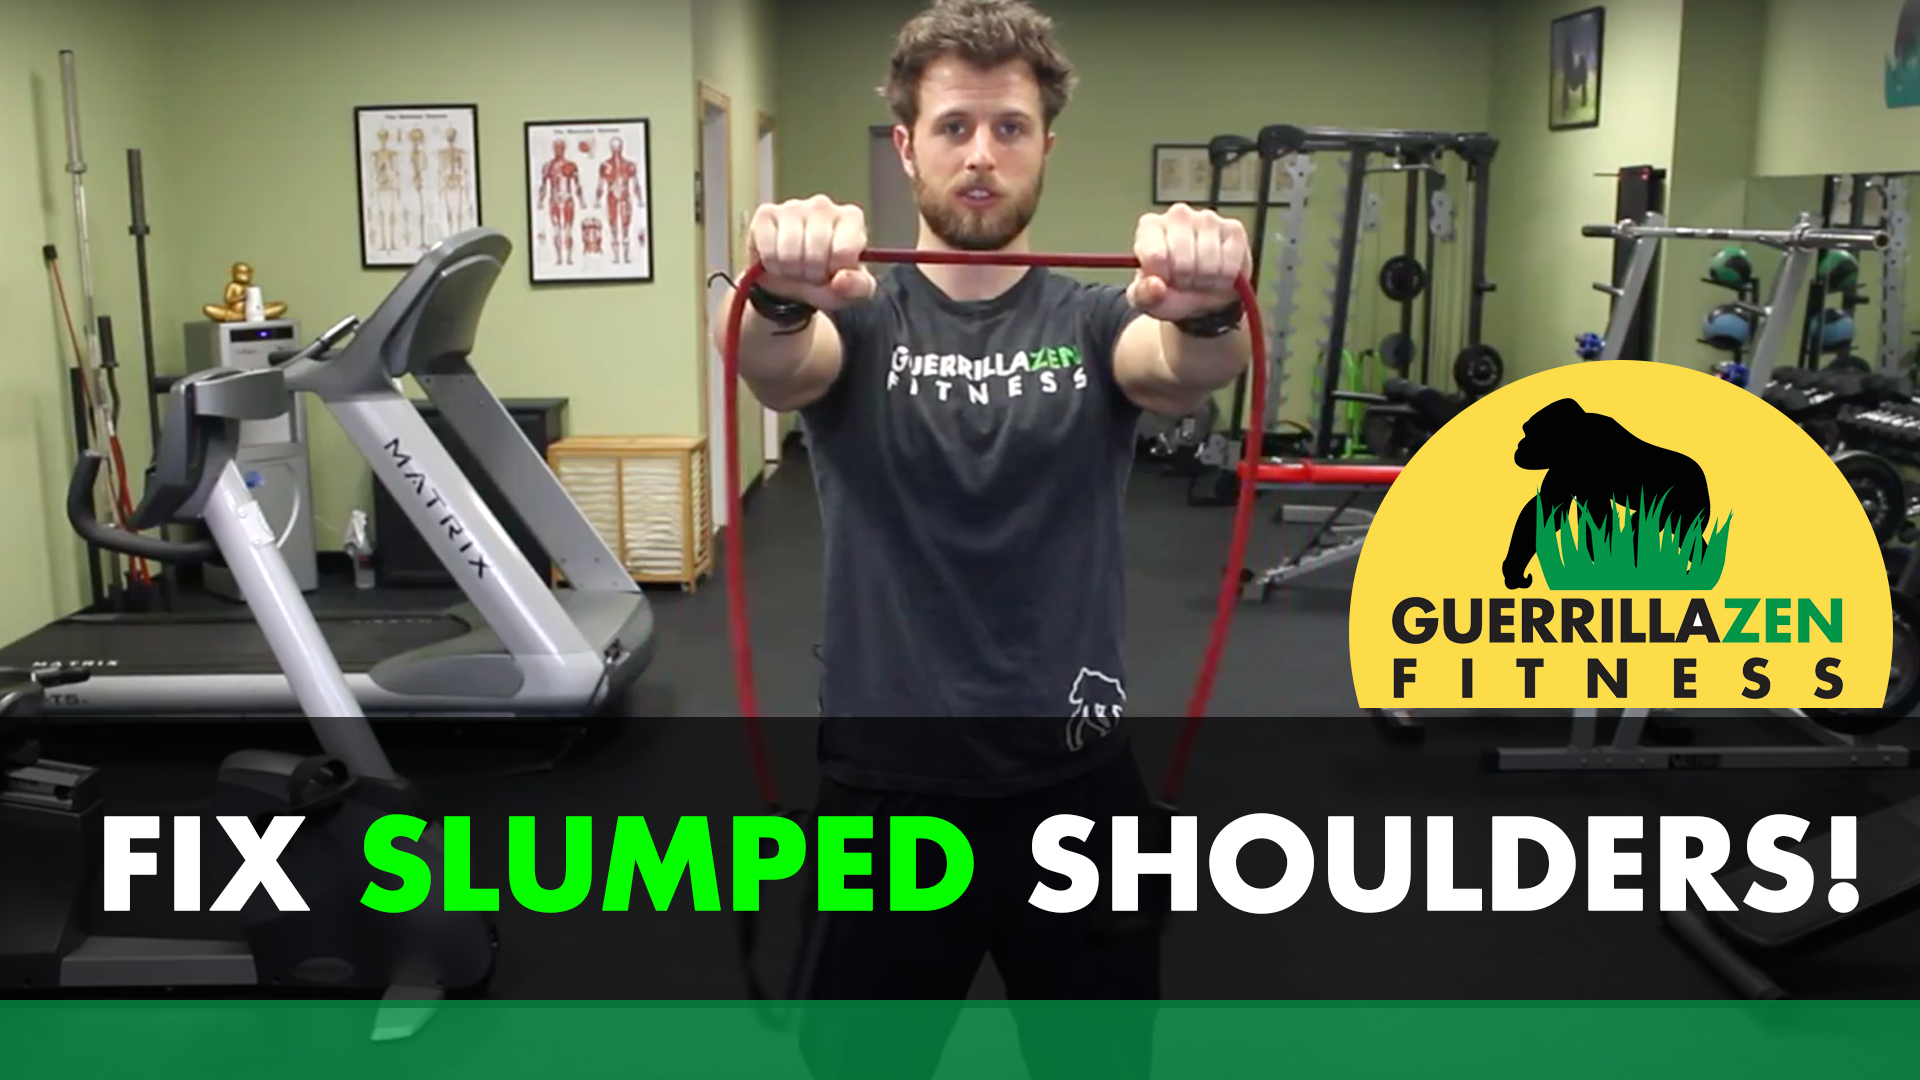 Posture Correction Exercise One Exercise To Fix Shoulder Posture Fast Guerrillazen Fitness